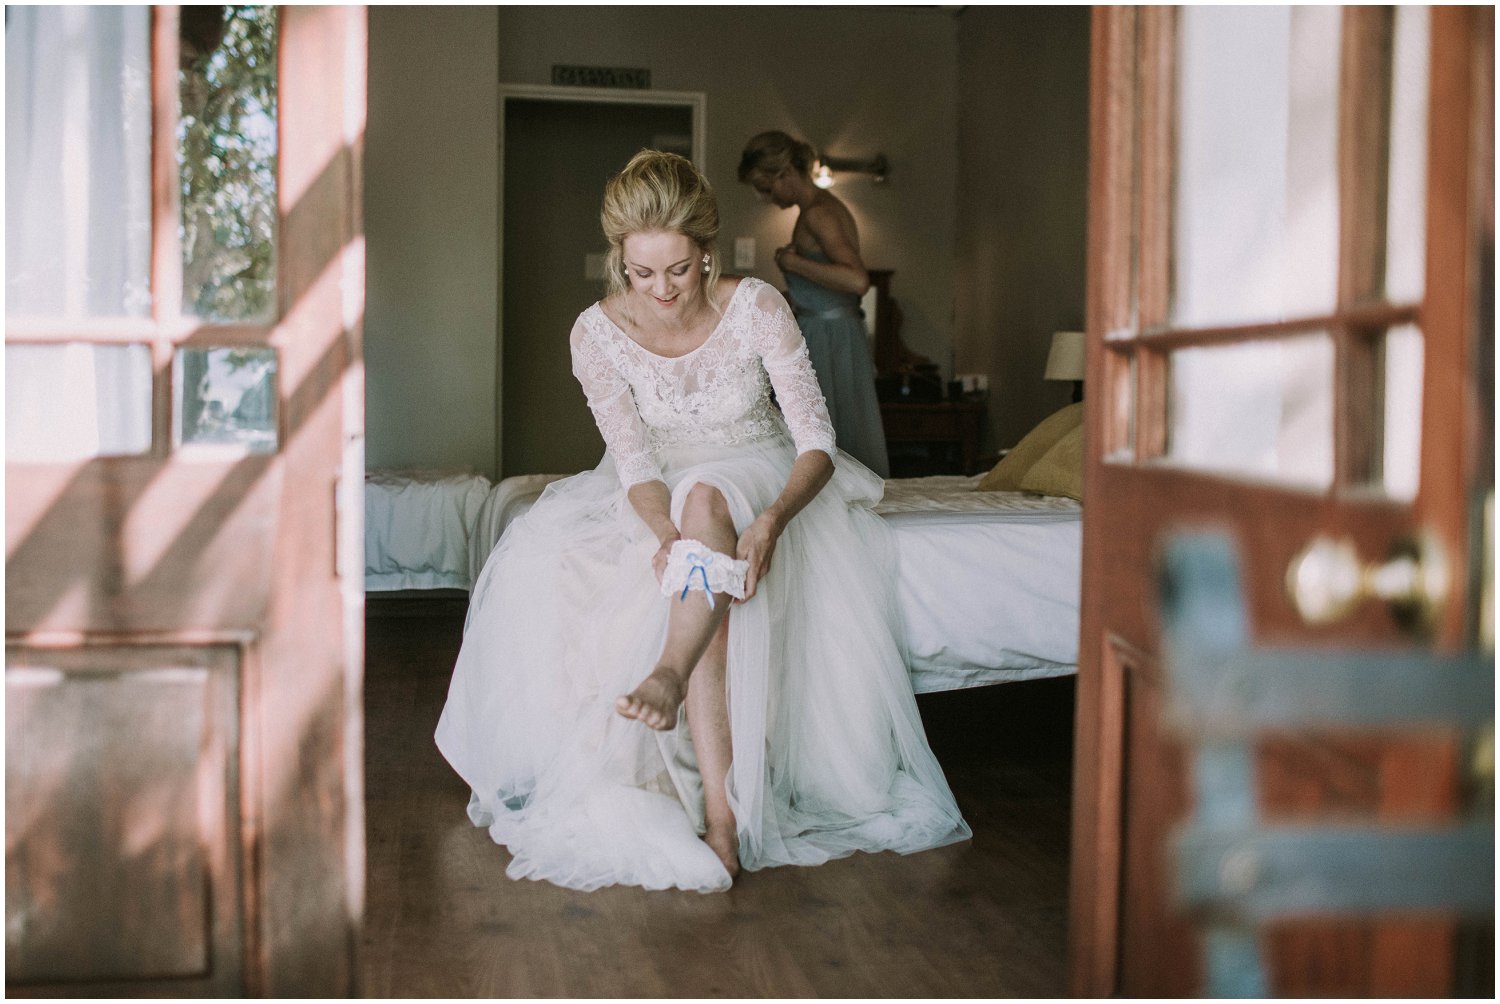 Top Wedding Photographer Cape Town South Africa Artistic Creative Documentary Wedding Photography Rue Kruger_0665.jpg